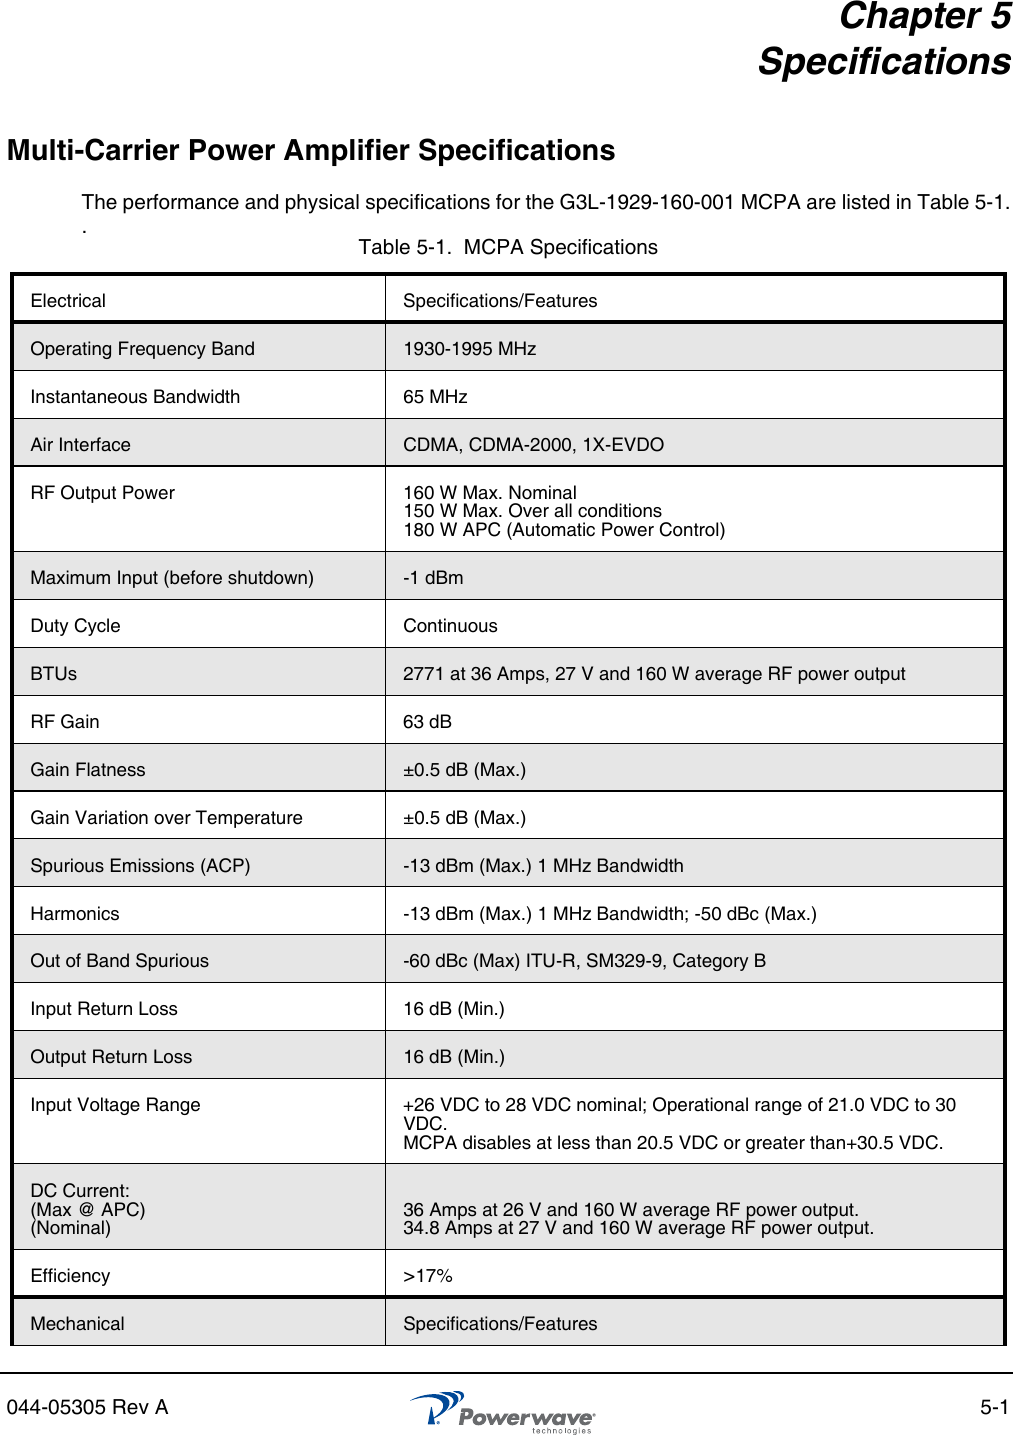 044-05305 Rev A 5-1Chapter 5SpecificationsMulti-Carrier Power Amplifier SpecificationsThe performance and physical specifications for the G3L-1929-160-001 MCPA are listed in Table 5-1..Table 5-1.  MCPA SpecificationsElectrical Specifications/FeaturesOperating Frequency Band 1930-1995 MHzInstantaneous Bandwidth 65 MHzAir Interface CDMA, CDMA-2000, 1X-EVDORF Output Power 160 W Max. Nominal150 W Max. Over all conditions180 W APC (Automatic Power Control)Maximum Input (before shutdown) -1 dBmDuty Cycle ContinuousBTUs 2771 at 36 Amps, 27 V and 160 W average RF power outputRF Gain 63 dBGain Flatness ±0.5 dB (Max.)Gain Variation over Temperature ±0.5 dB (Max.)Spurious Emissions (ACP) -13 dBm (Max.) 1 MHz BandwidthHarmonics -13 dBm (Max.) 1 MHz Bandwidth; -50 dBc (Max.)Out of Band Spurious -60 dBc (Max) ITU-R, SM329-9, Category BInput Return Loss 16 dB (Min.)Output Return Loss 16 dB (Min.)Input Voltage Range  +26 VDC to 28 VDC nominal; Operational range of 21.0 VDC to 30 VDC.MCPA disables at less than 20.5 VDC or greater than+30.5 VDC.DC Current:(Max @ APC)(Nominal)36 Amps at 26 V and 160 W average RF power output.34.8 Amps at 27 V and 160 W average RF power output.Efficiency &gt;17%Mechanical Specifications/Features